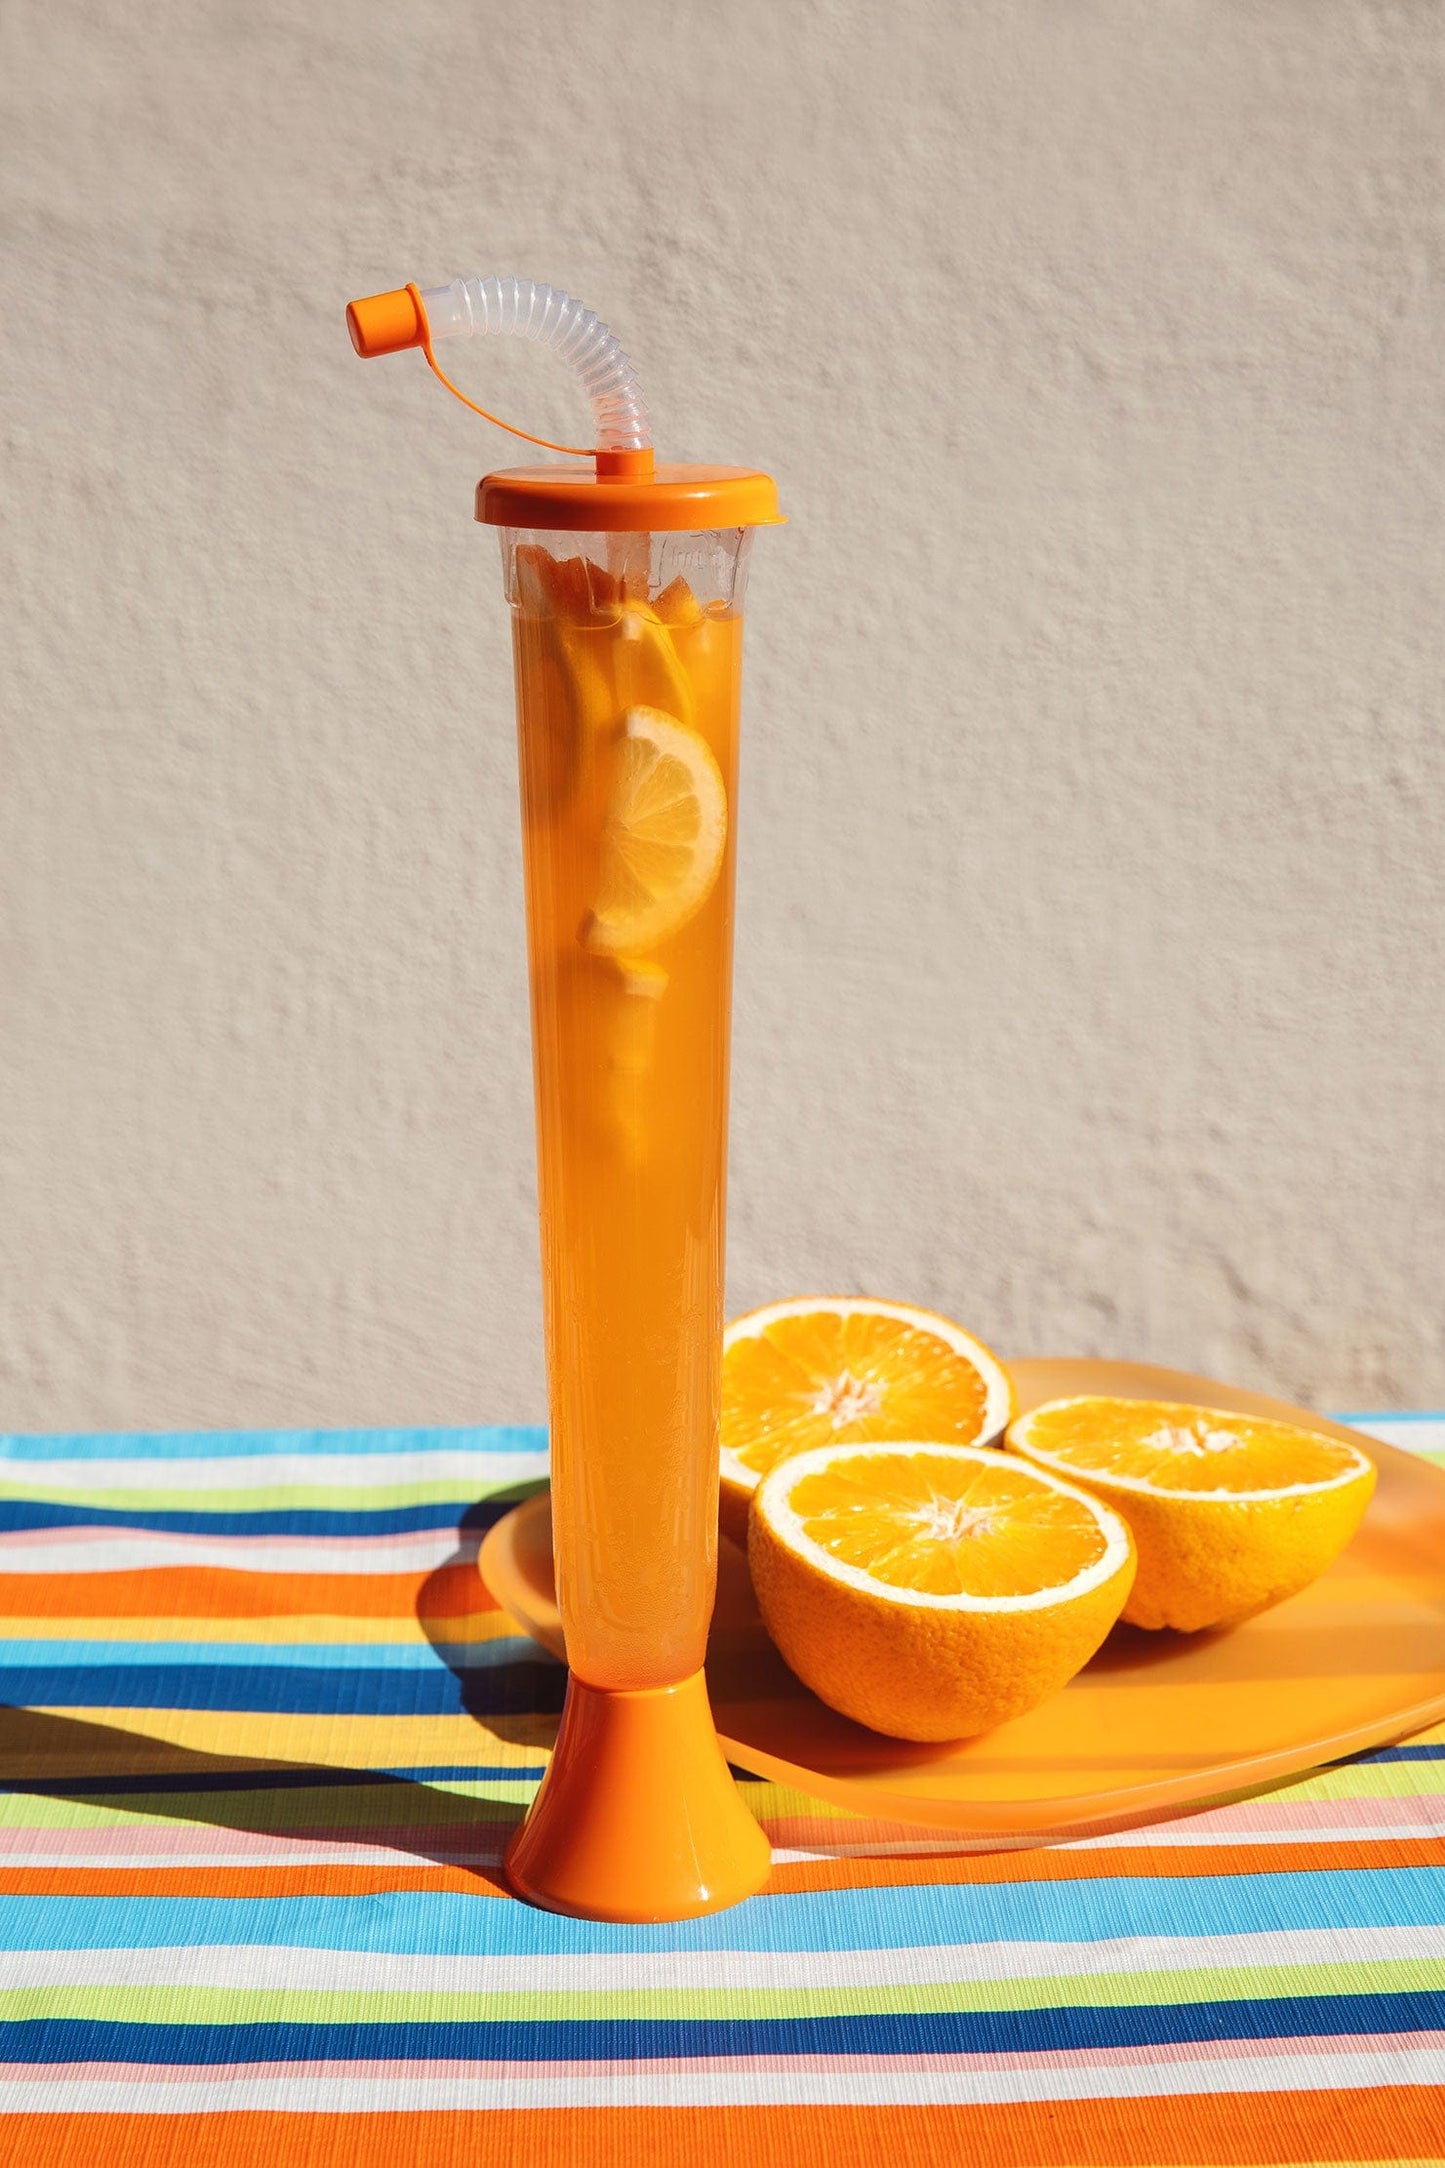 https://noveltycupsusa.com/cdn/shop/files/sweet-world-usa-yard-cups-54-or-108-cups-yard-cups-with-orange-lids-and-straws-14oz-for-margaritas-and-frozen-drinks-cups-with-lids-and-straws-36472426004639.jpg?v=1690918704&width=1445